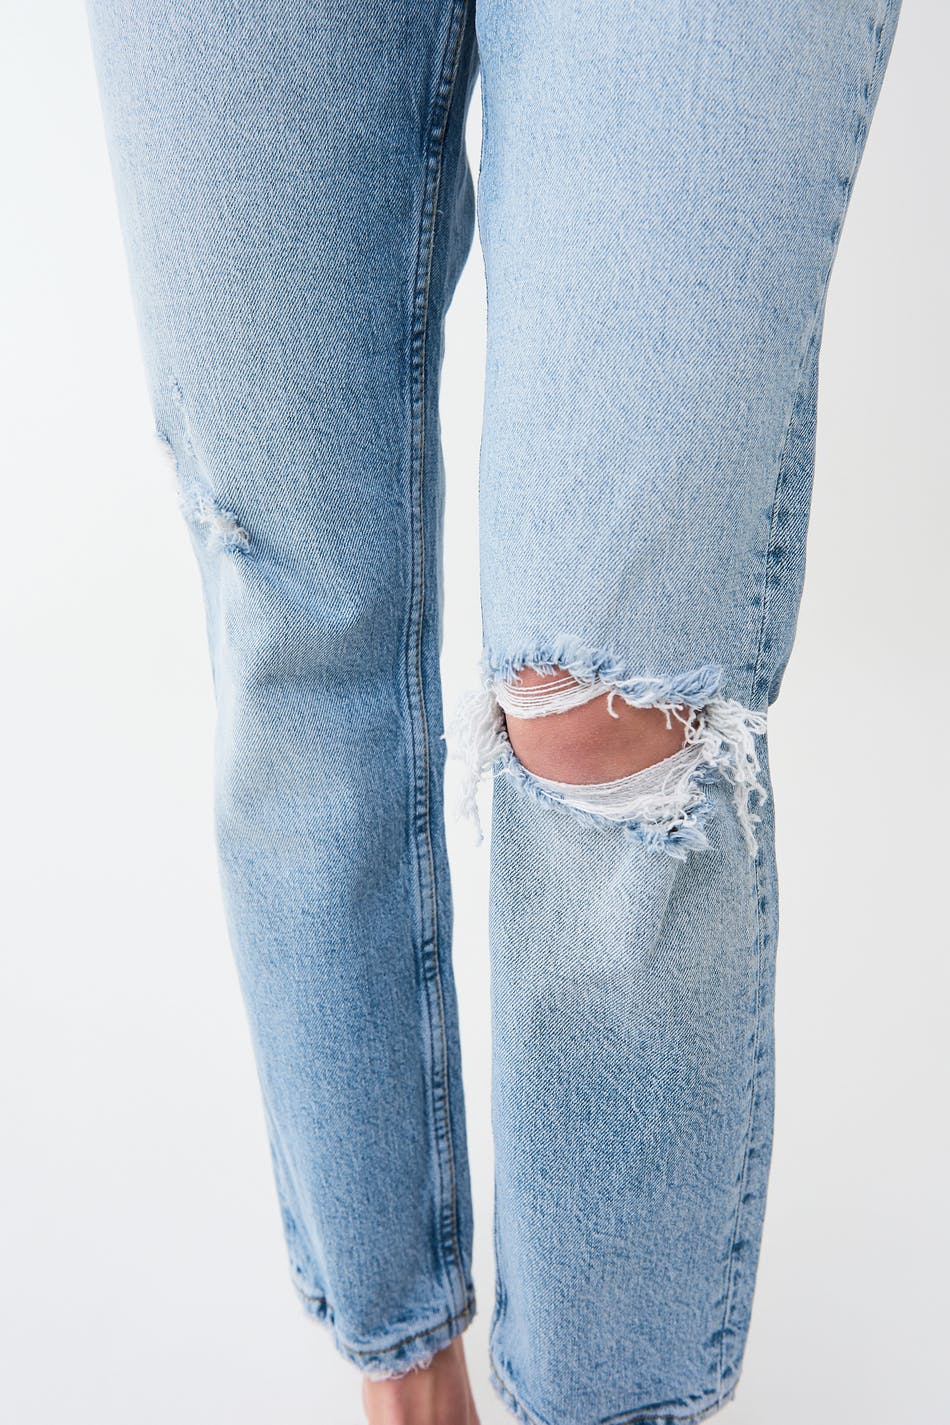 gina tricot petite jeans